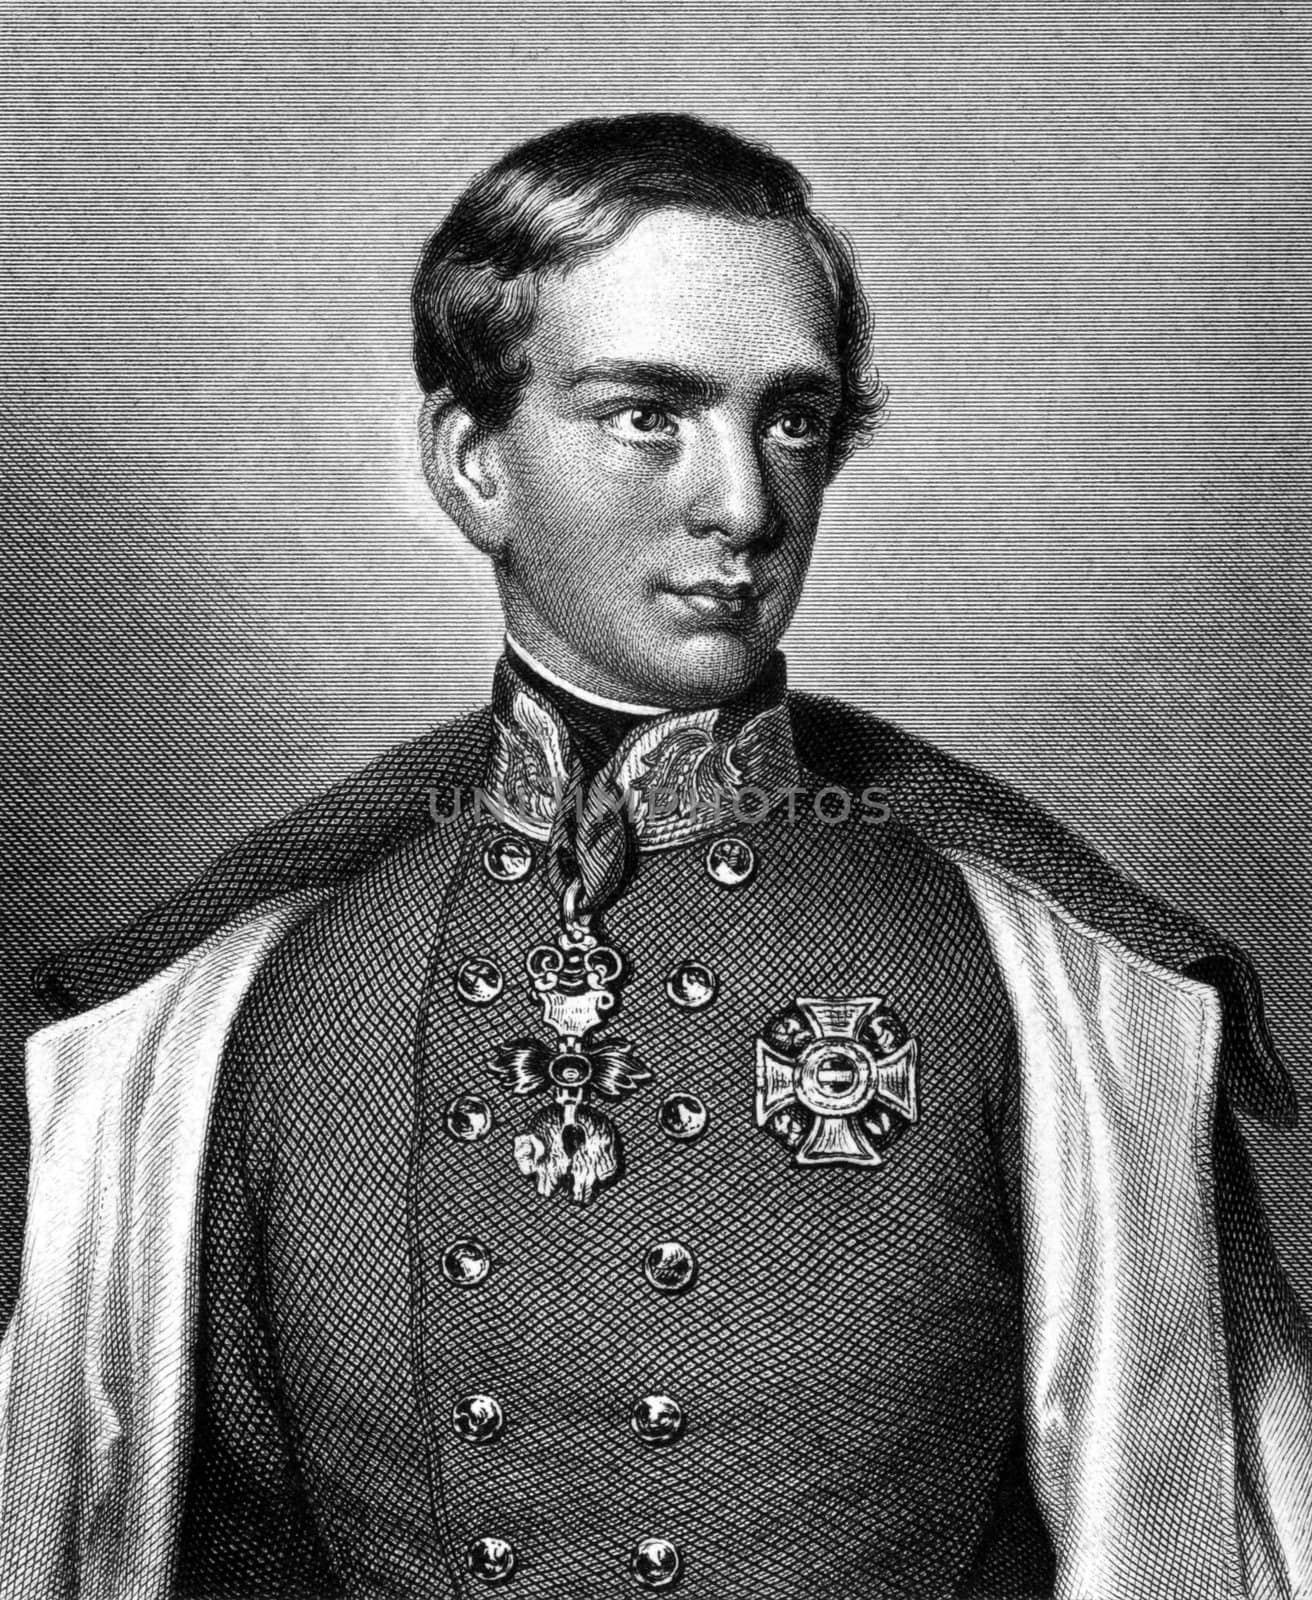 Franz Joseph I of Austria (1830-1916) on engraving from 1859. Emperor of Austria. Engraved by unknown artist and published in Meyers Konversations-Lexikon, Germany,1859.